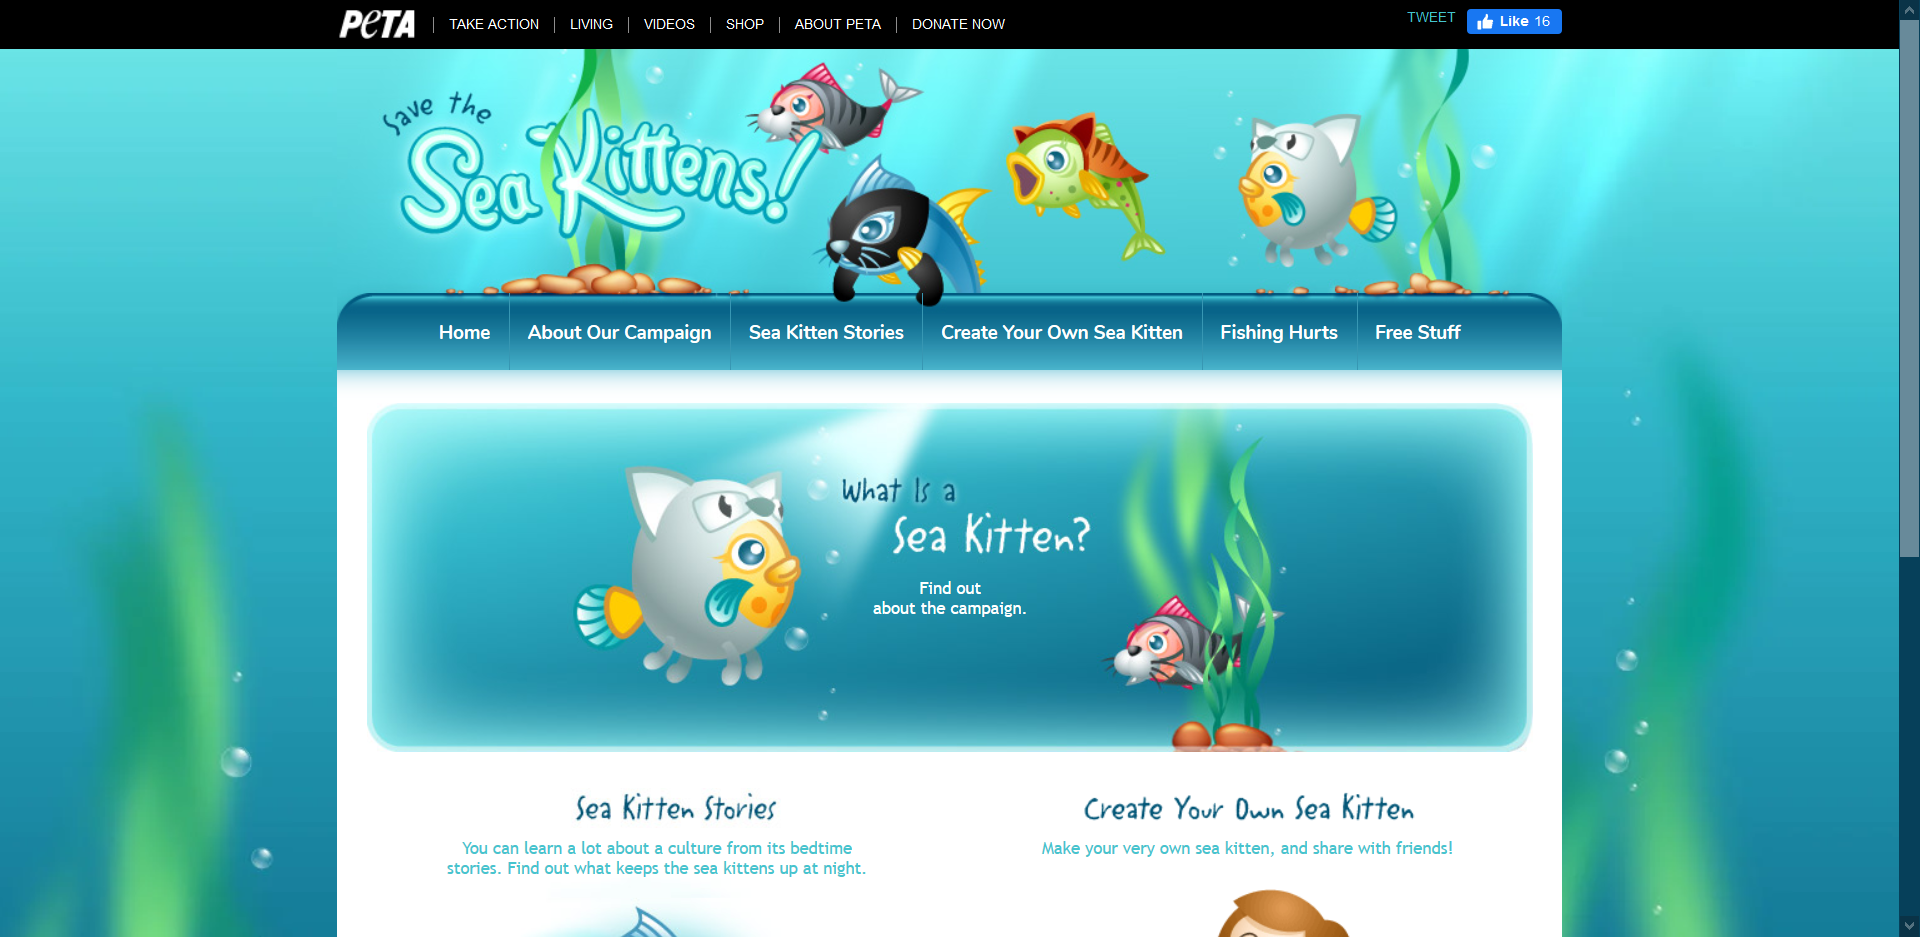 Save The Sea Kittens!